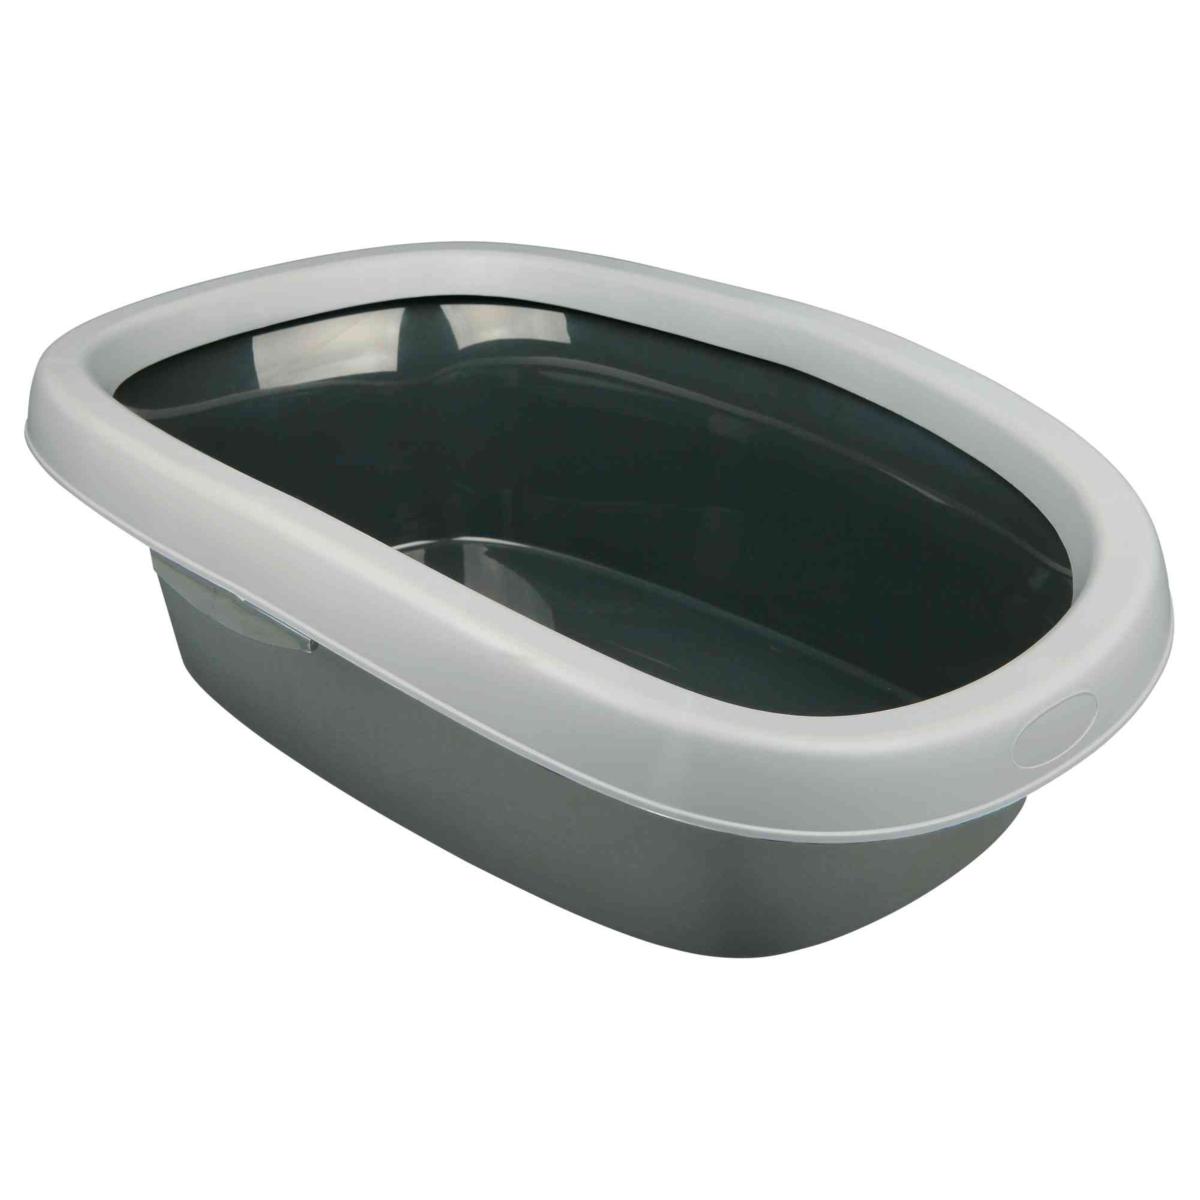 Trixie Carlo Curved Plastic Cat Litter Tray with Rim